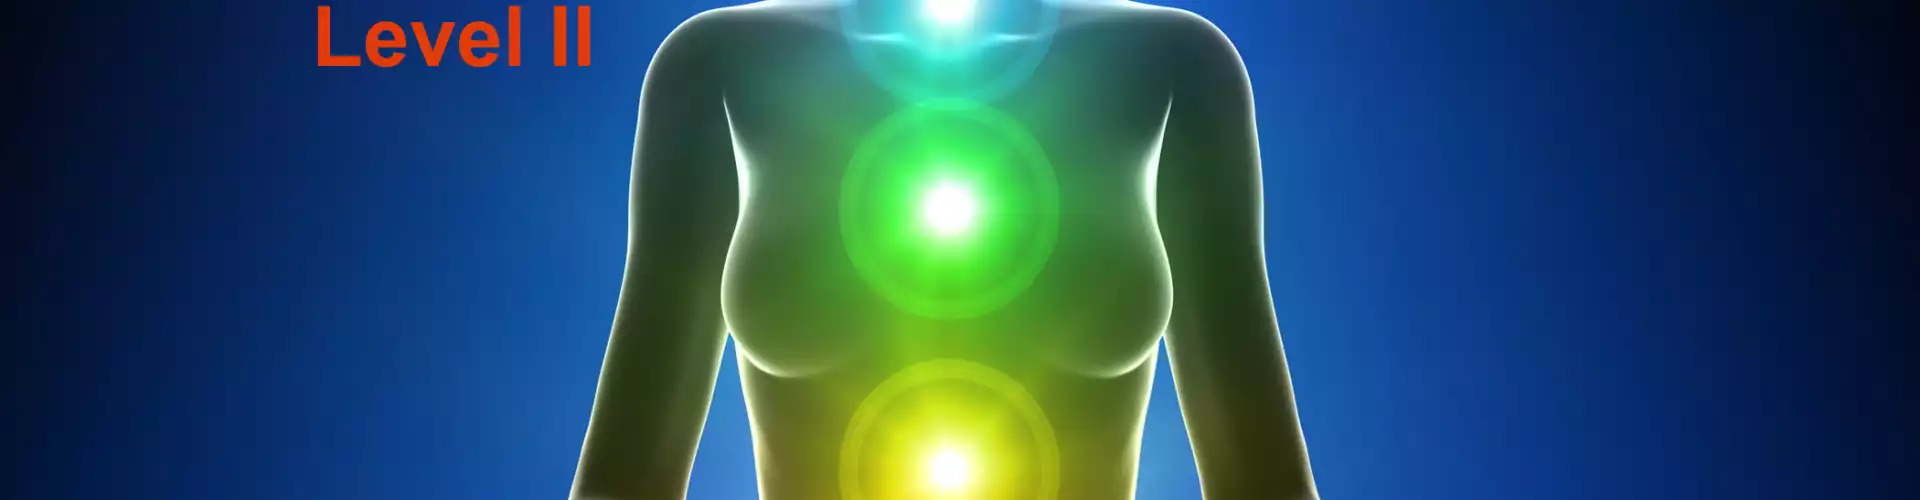 Understanding Your Energetic System - The Chakras & Outer Bodies as a system